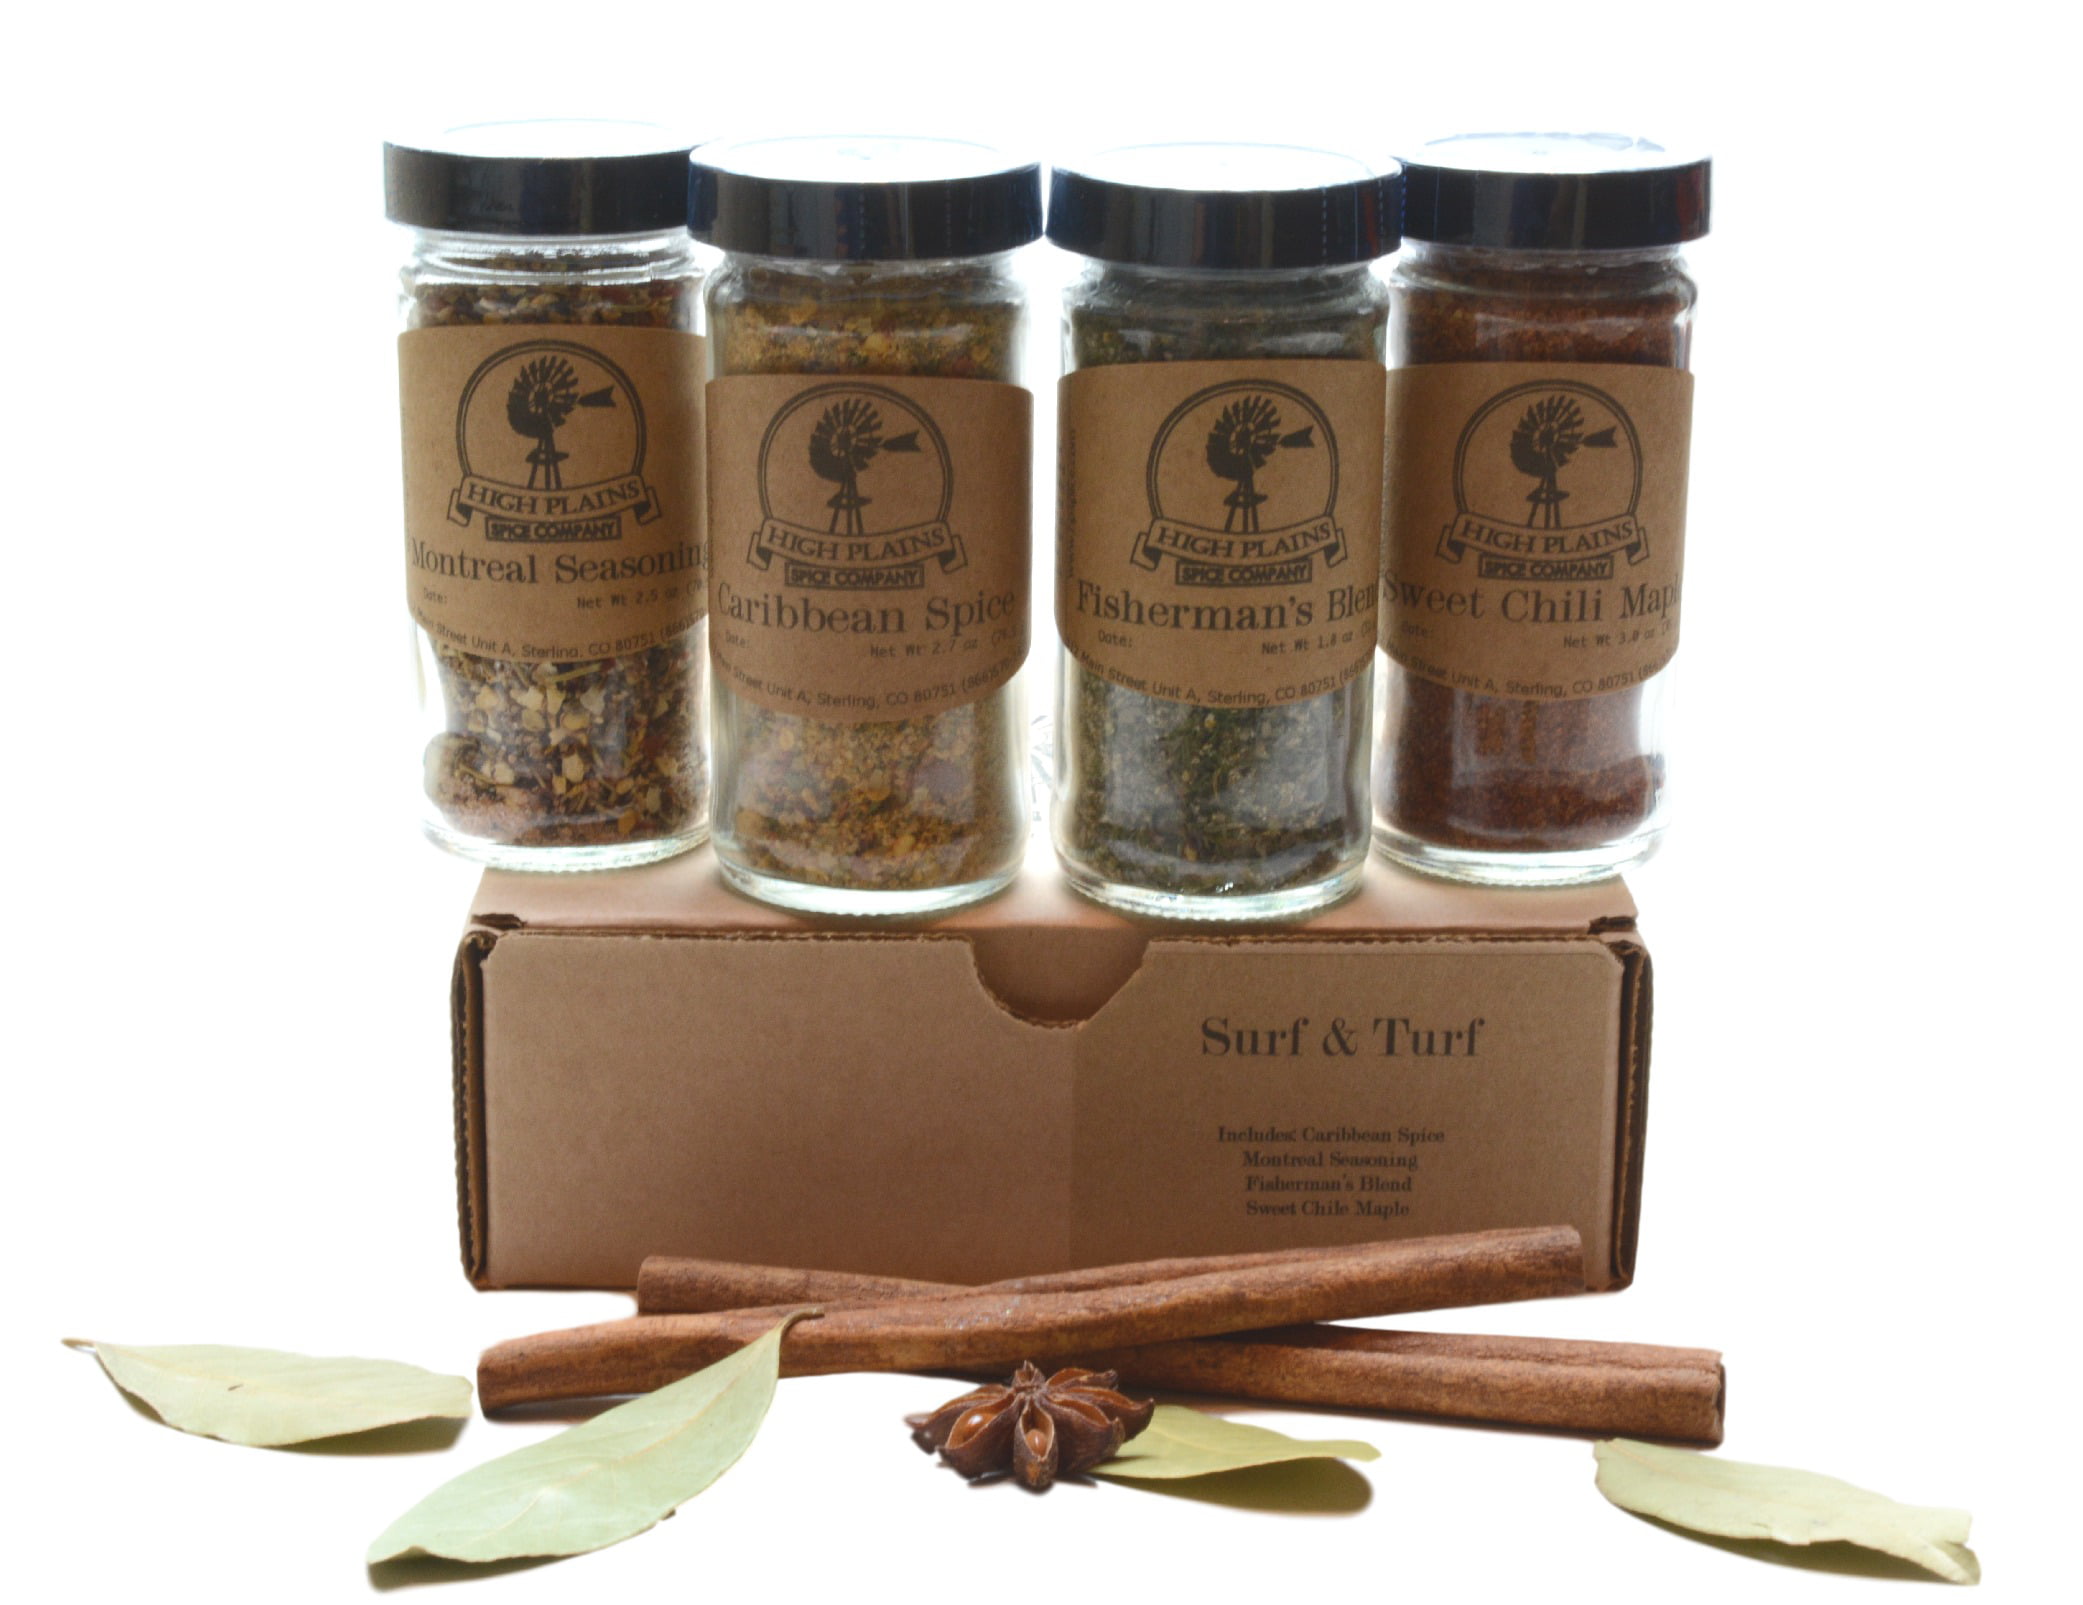 4-piece Spice Gift Set by Big Ls Blends 